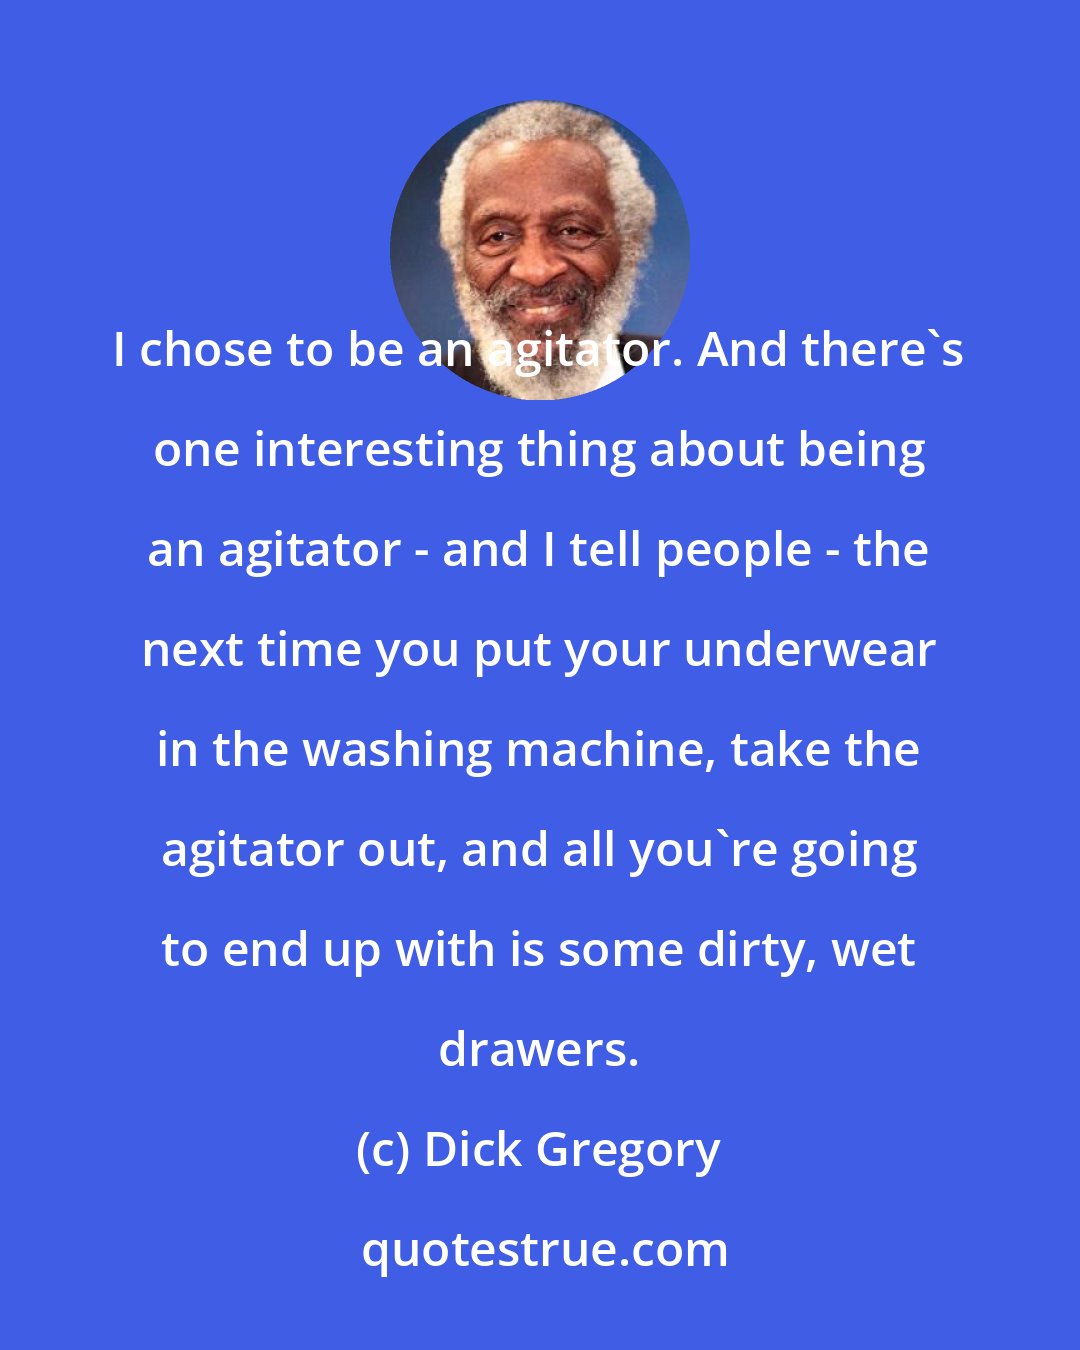 Dick Gregory: I chose to be an agitator. And there's one interesting thing about being an agitator - and I tell people - the next time you put your underwear in the washing machine, take the agitator out, and all you're going to end up with is some dirty, wet drawers.